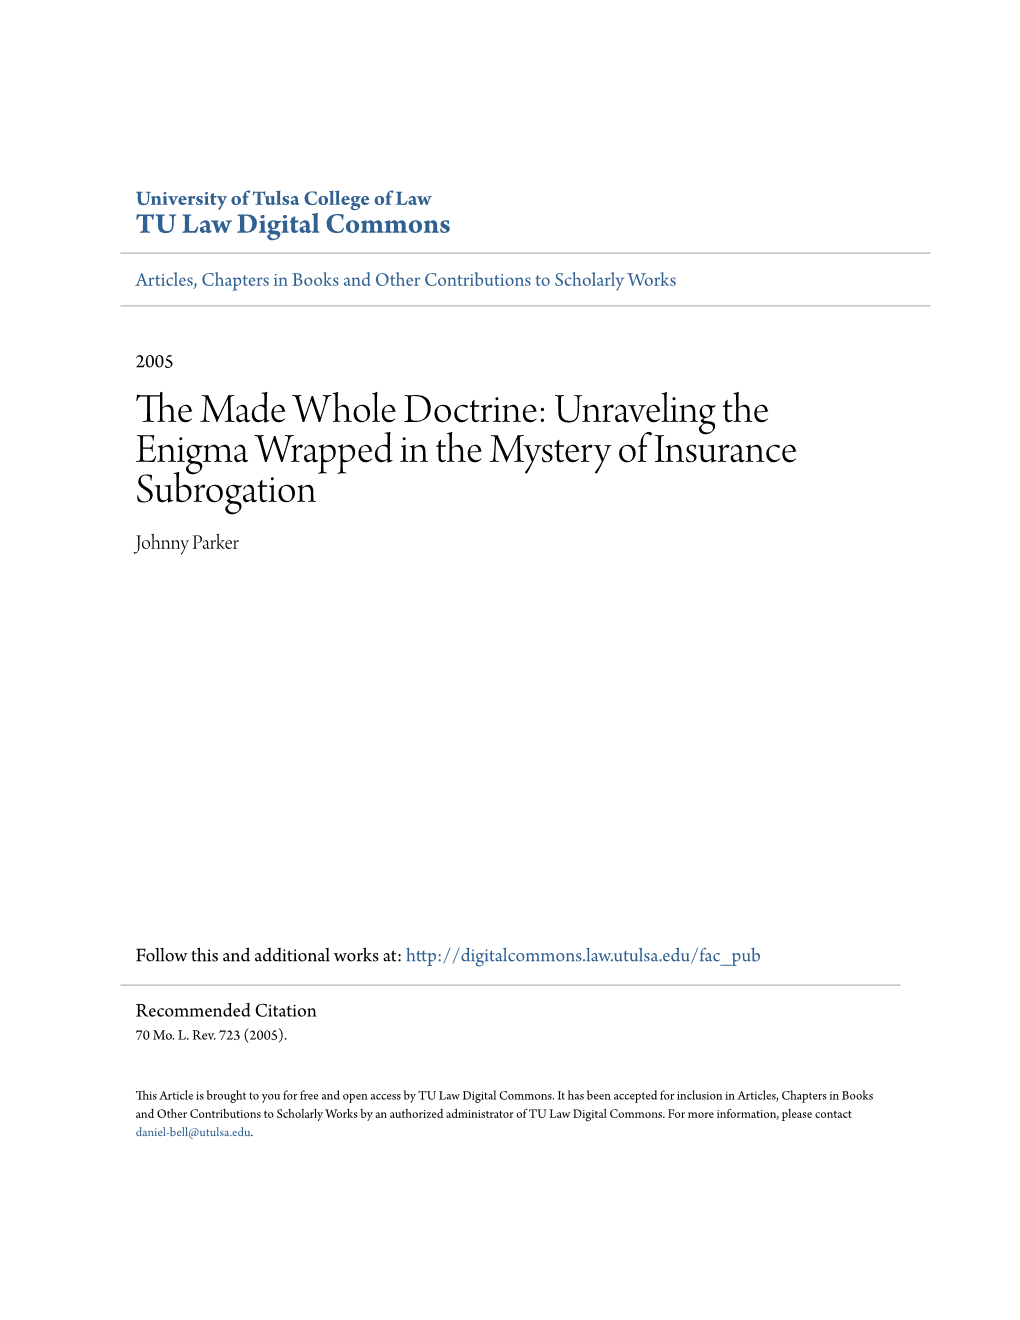 The Made Whole Doctrine: Unraveling the Enigma Wrapped in the Mystery of Insurance Subrogation